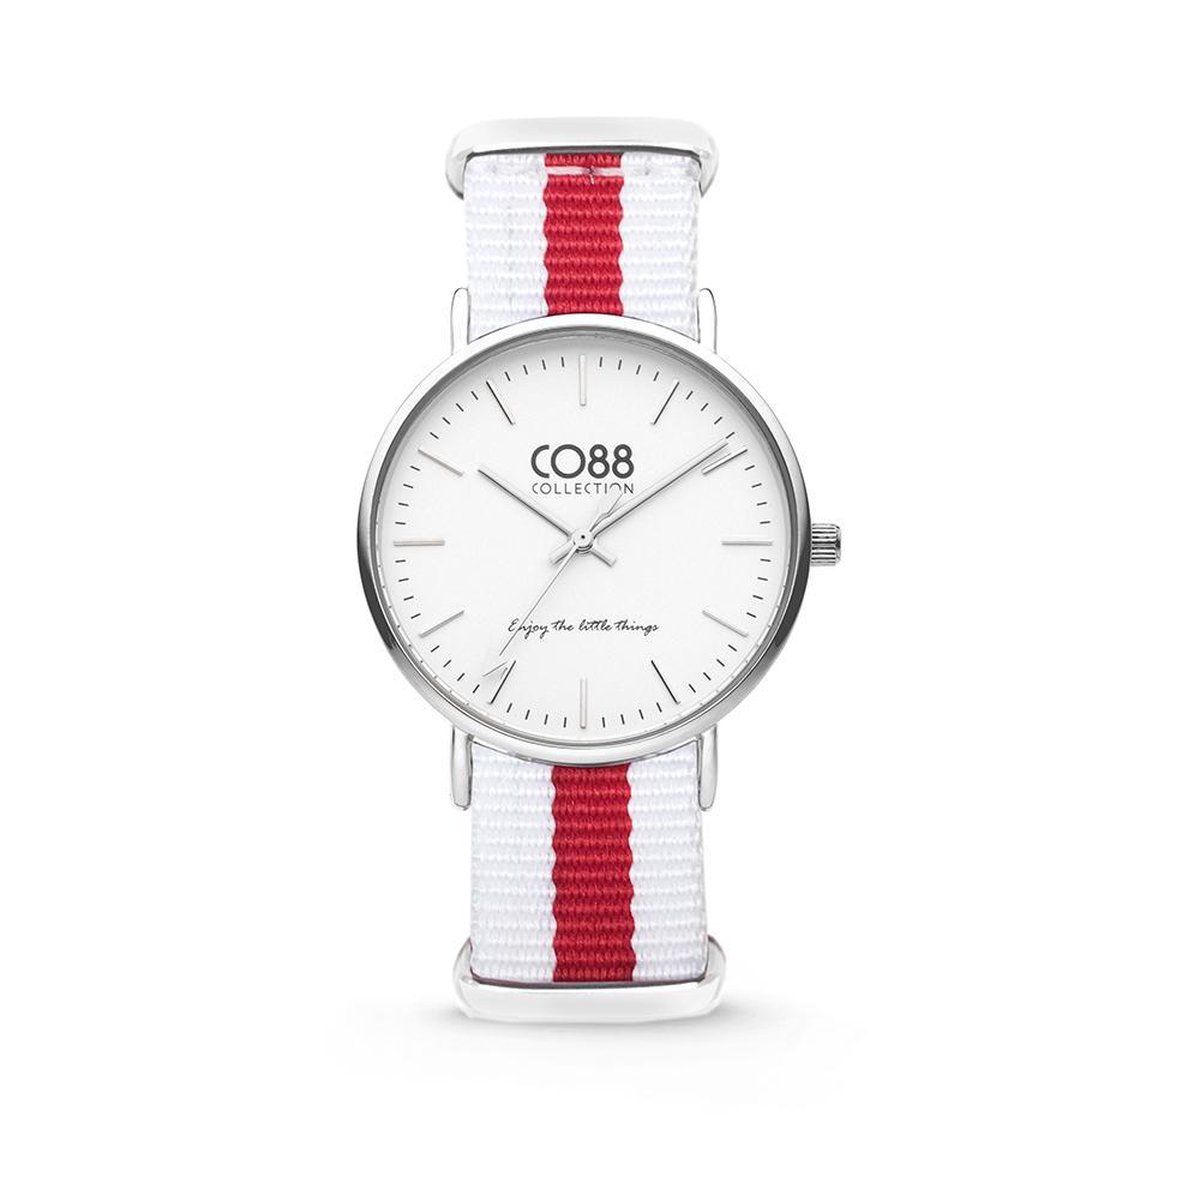 CO88 Collection Watches 8CW 10027 Horloge - Nato Band - Ø 36 mm - Wit - Rood